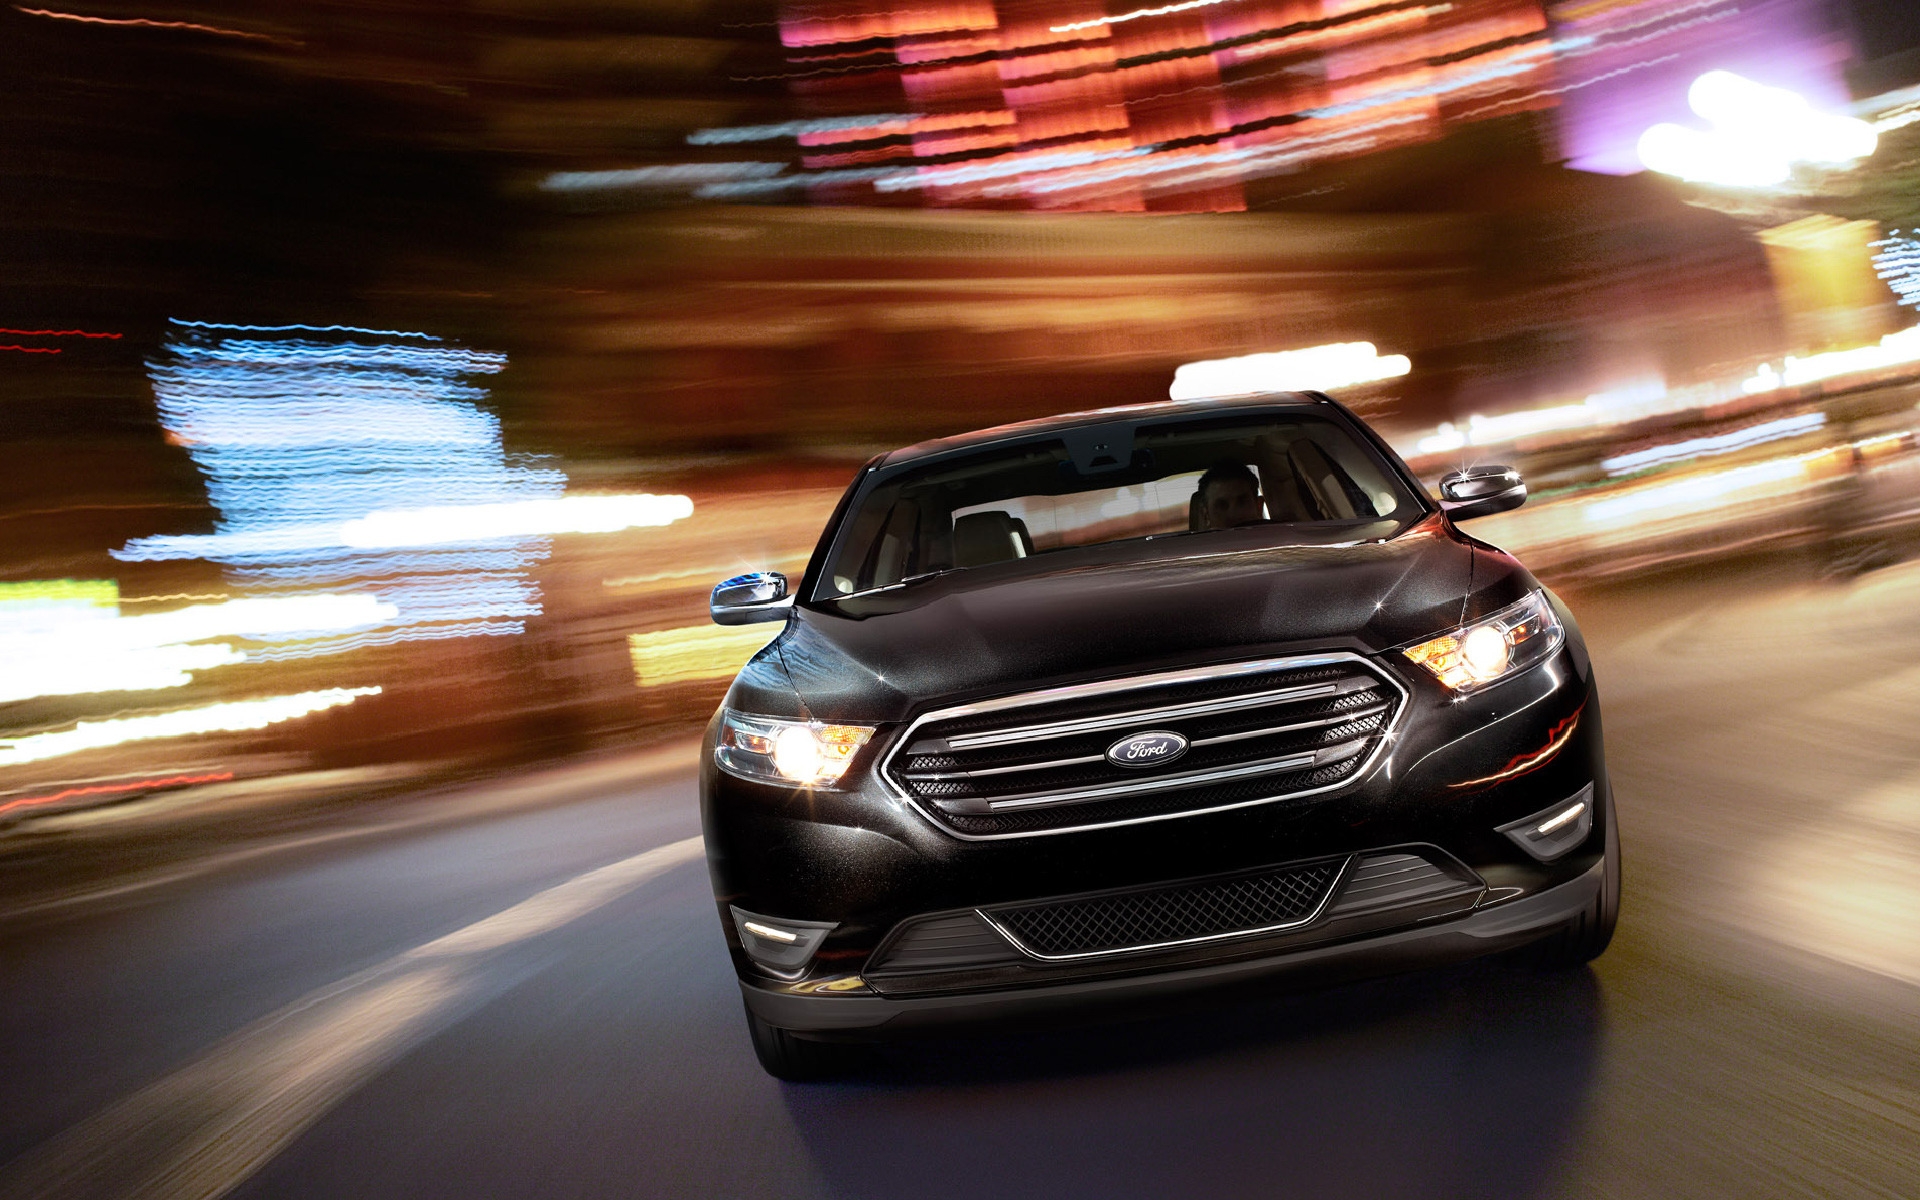 2013 Ford Taurus Limited for 1920 x 1200 widescreen resolution